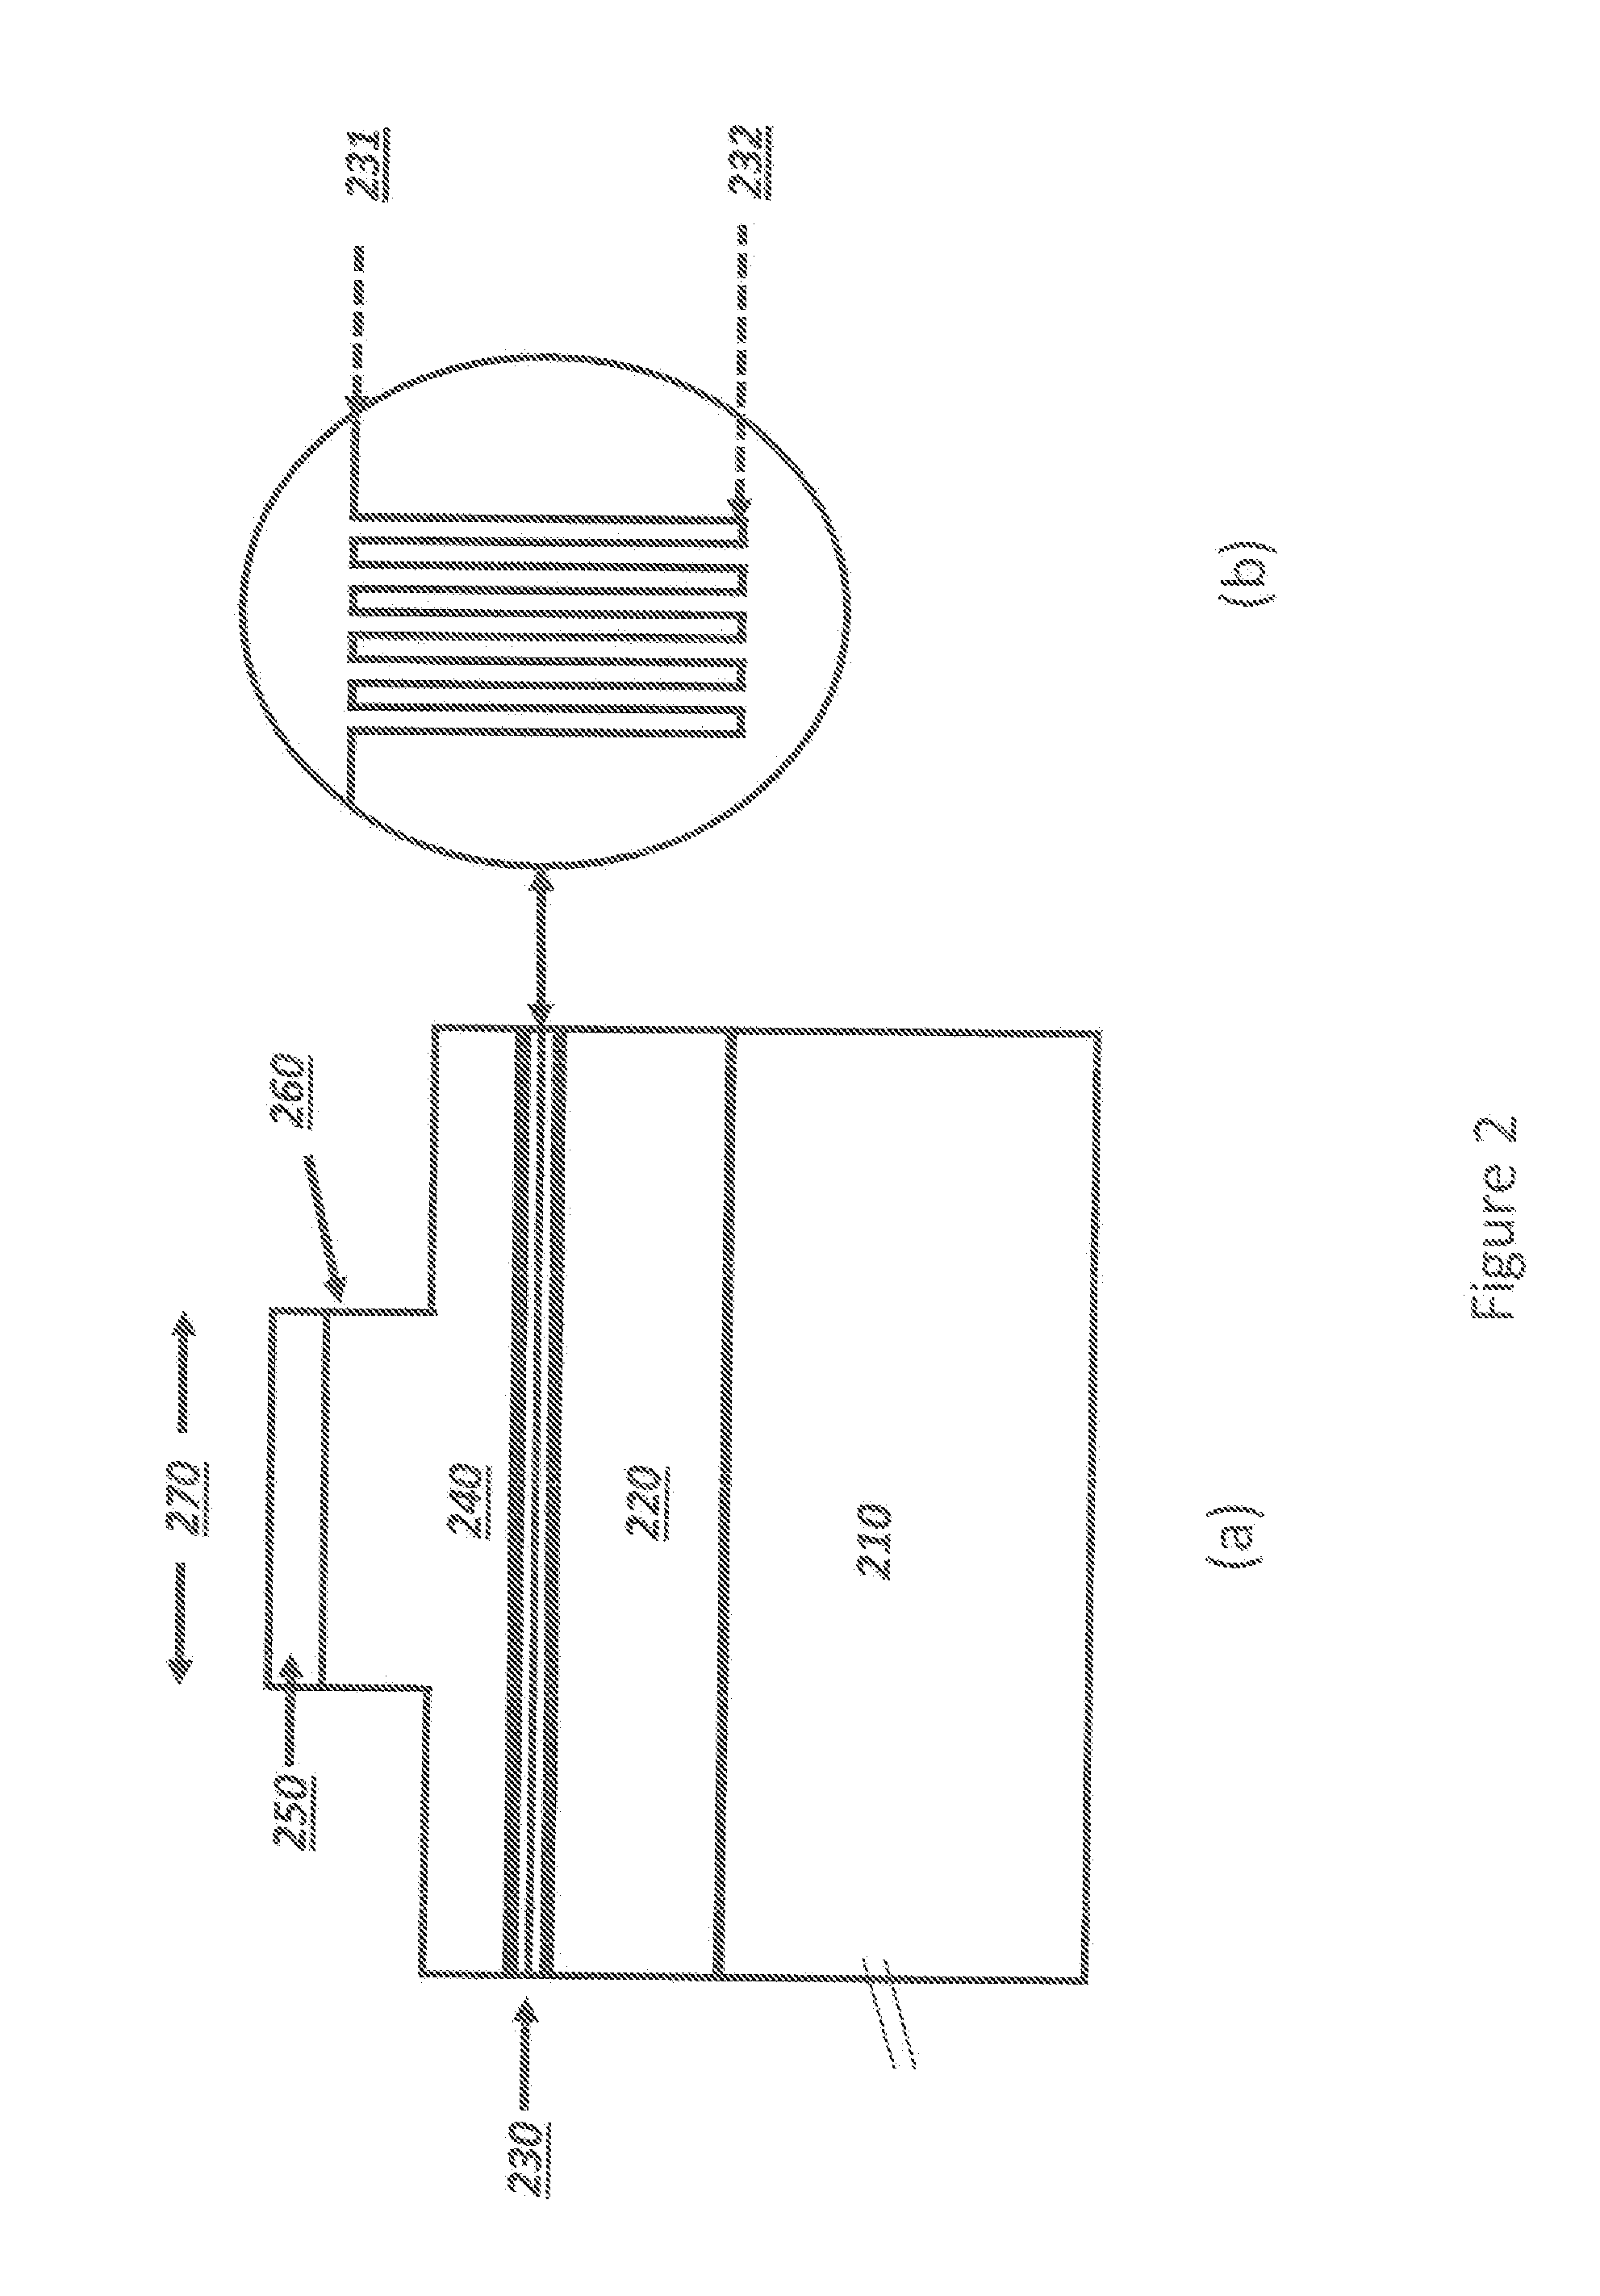 Method and System for Operating Semiconductor Optical Amplifiers